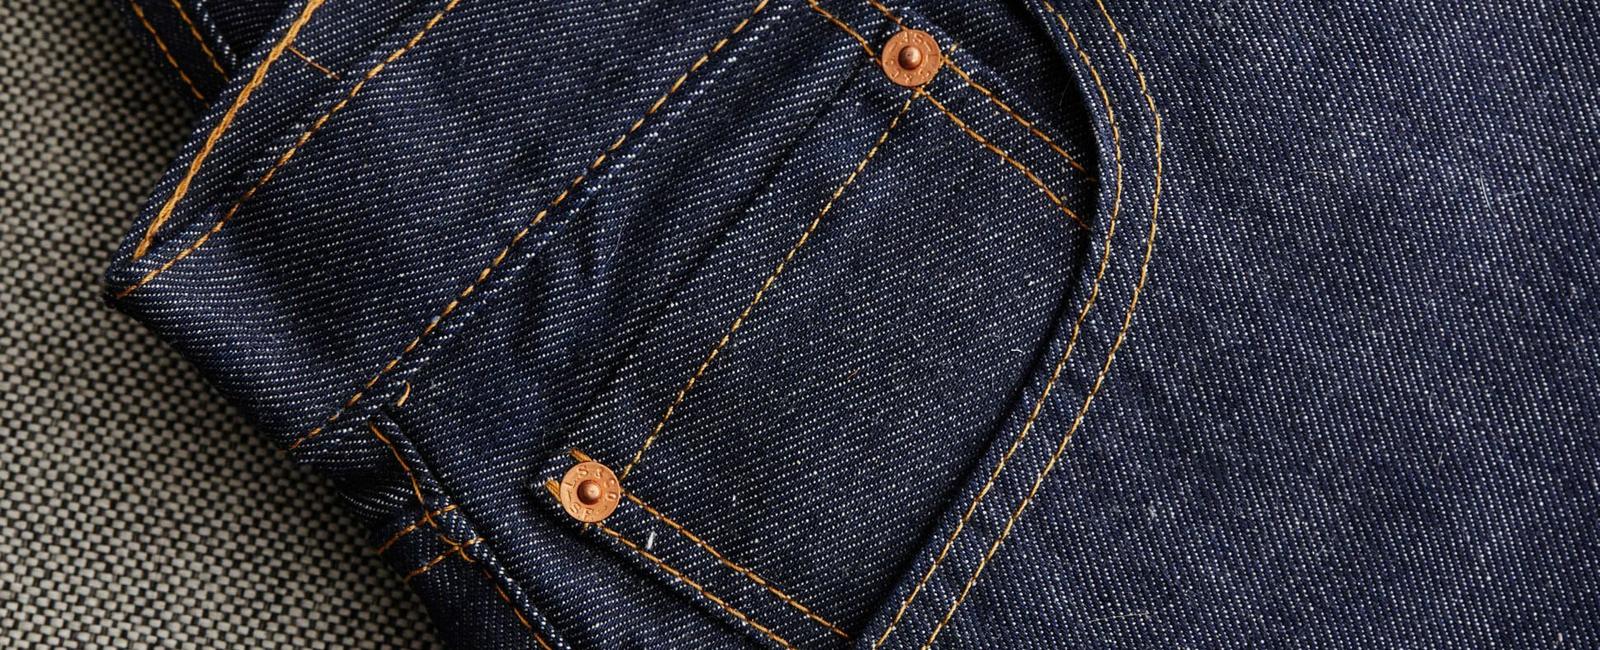 That tiny pocket in jeans was designed to store pocket watches